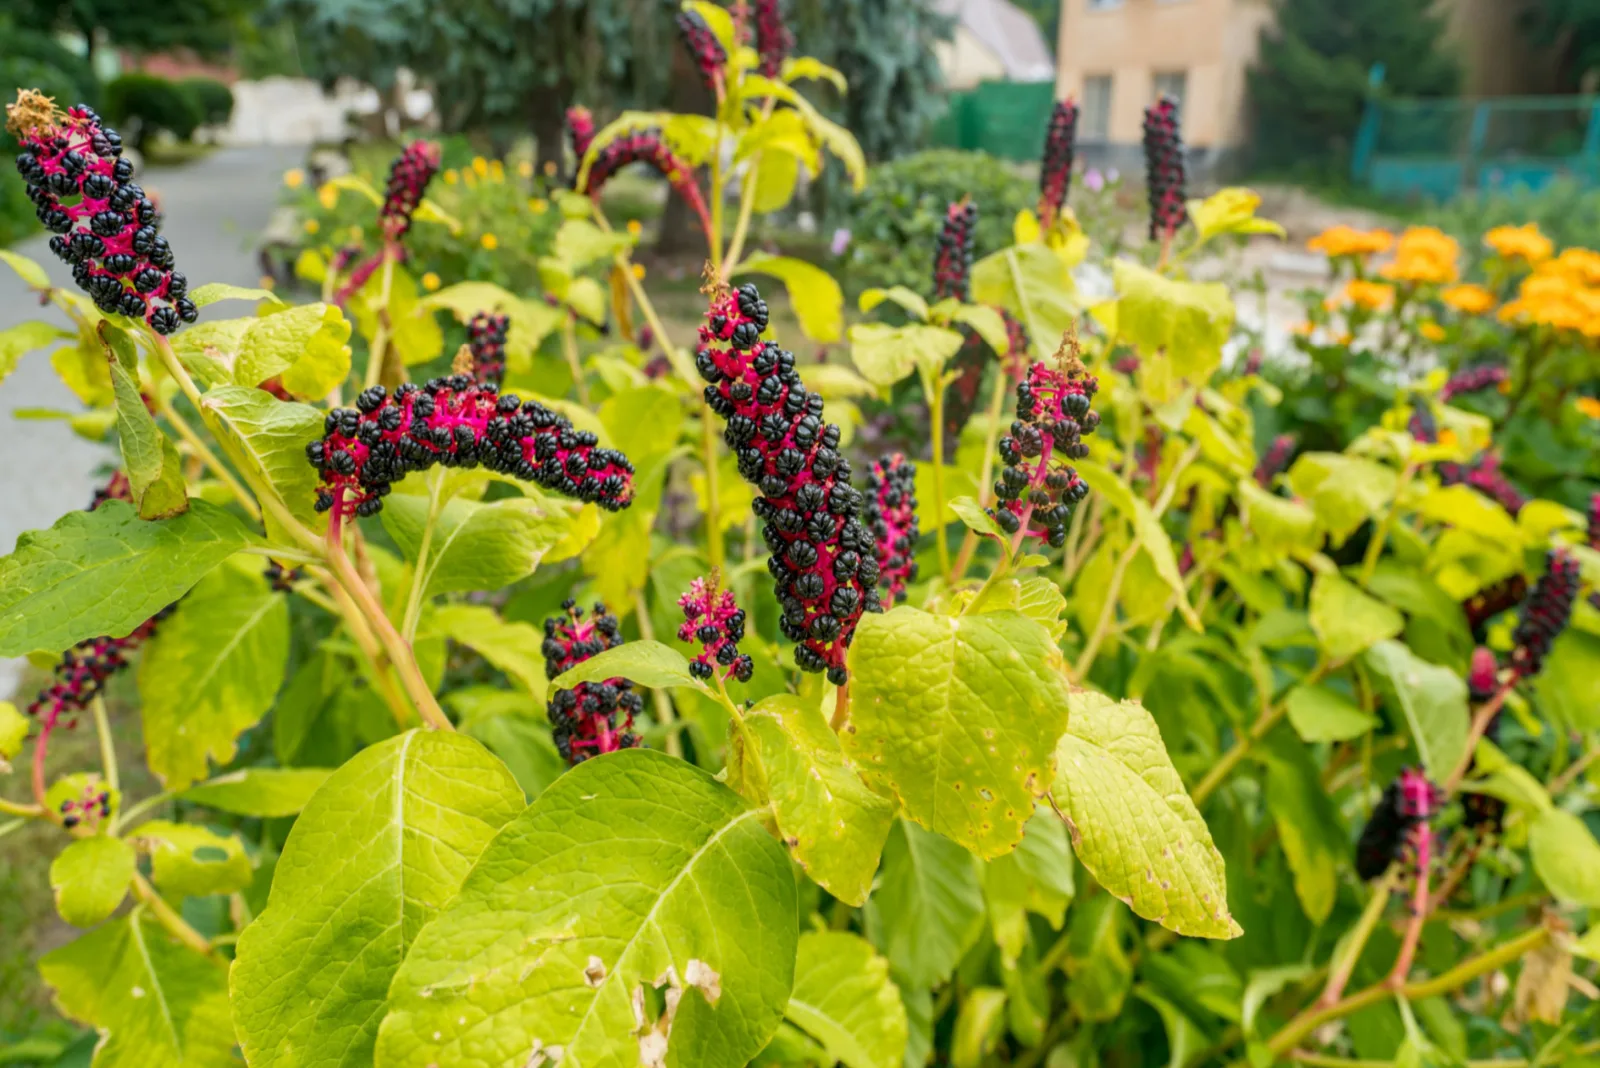 pokeweed plant with ripe berries